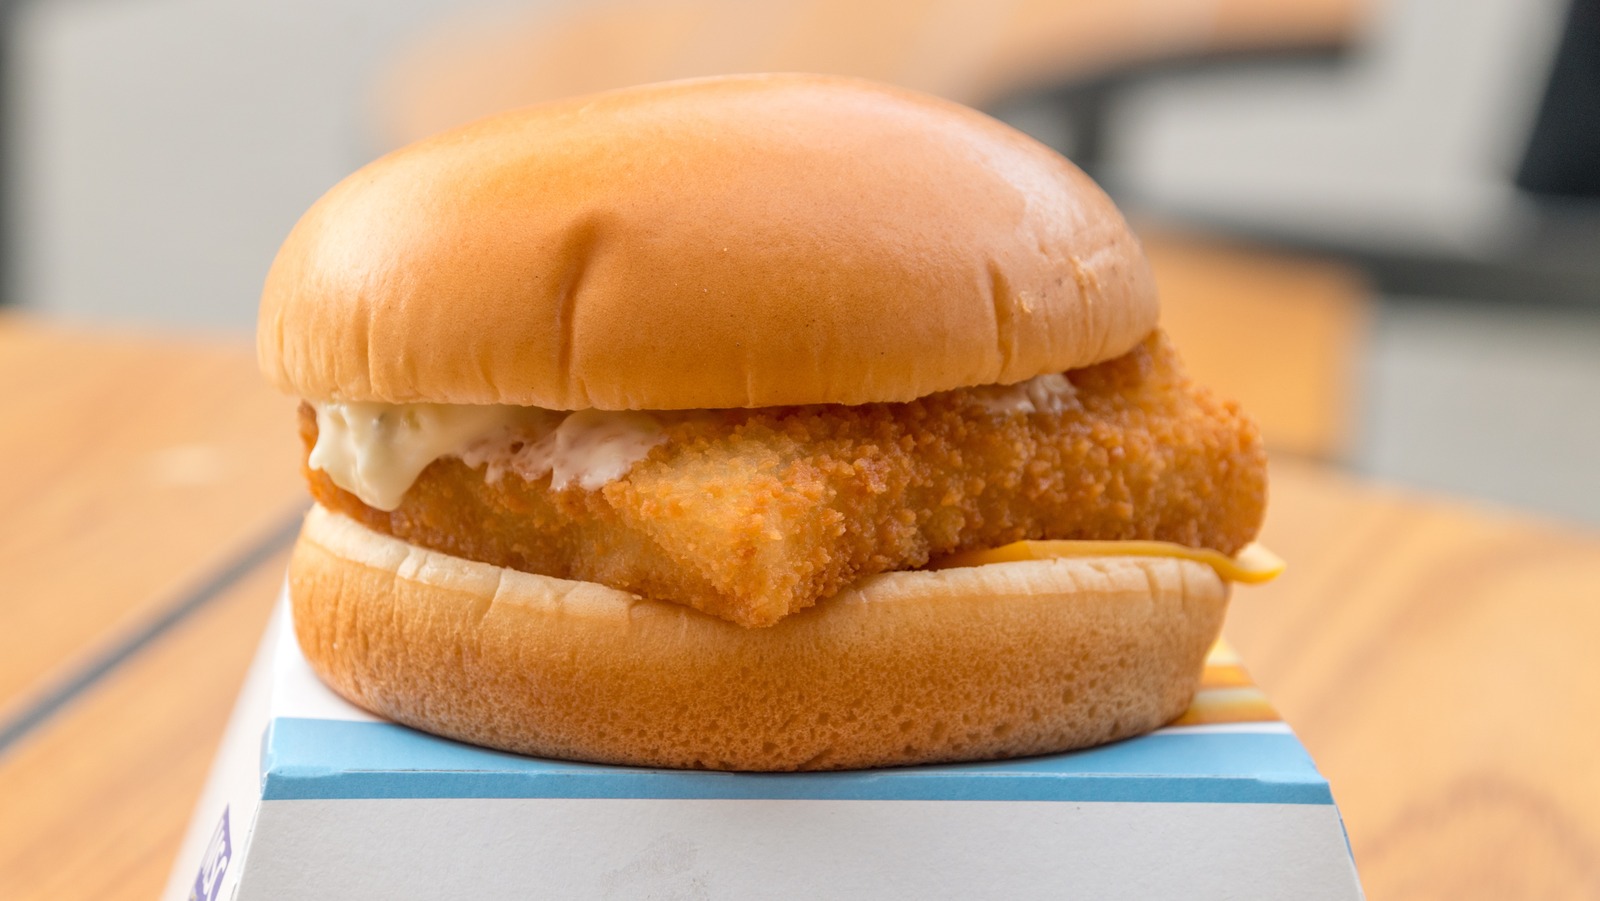 11 Facts About McDonald's Filet-O-Fish That Are Finally Out In The